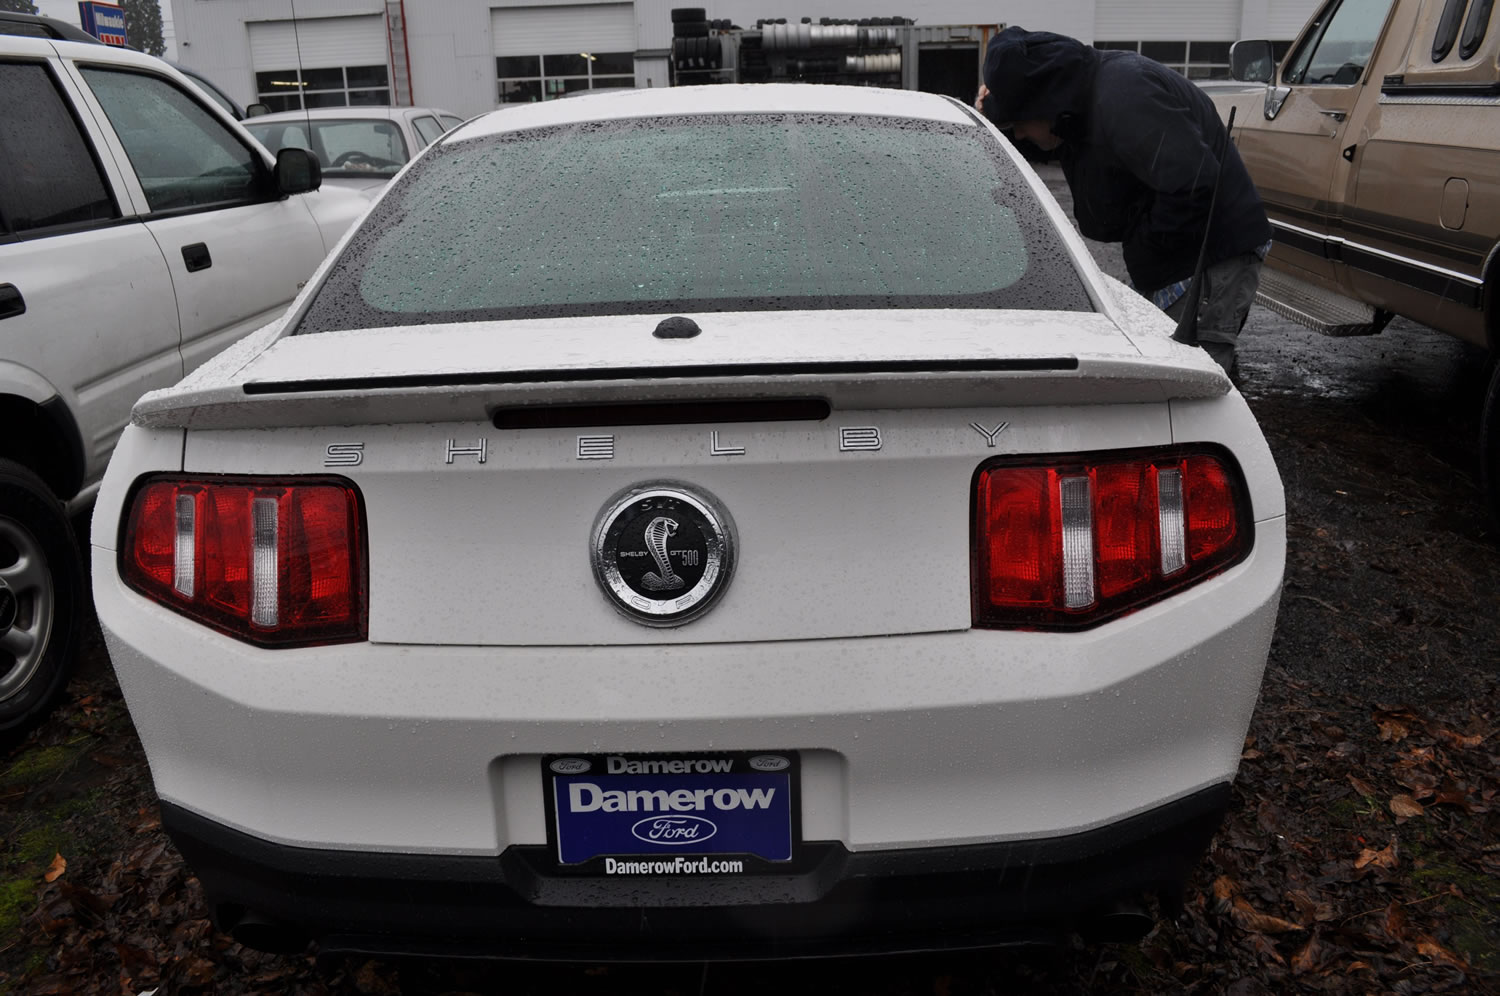 A police detective peers in the window of a 2012 Ford Shelby Mustang allegedly stolen, along with 200 new car keys, by a Vancouver man.